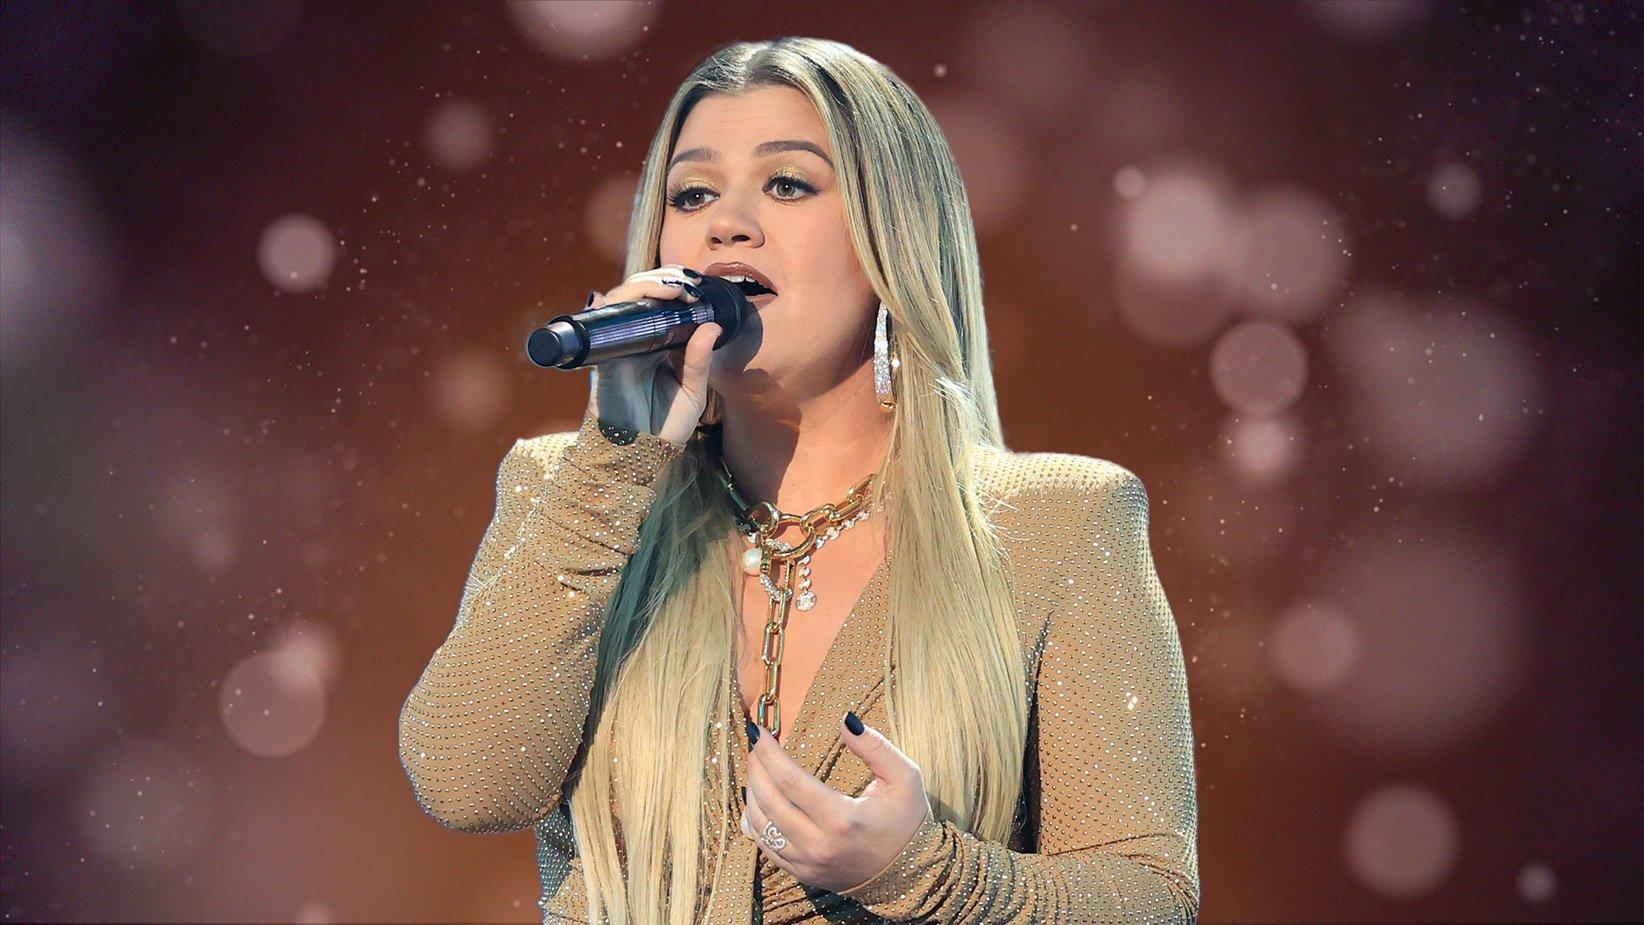 Kelly Clarkson - Piece By Piece  Great song lyrics, Meaningful